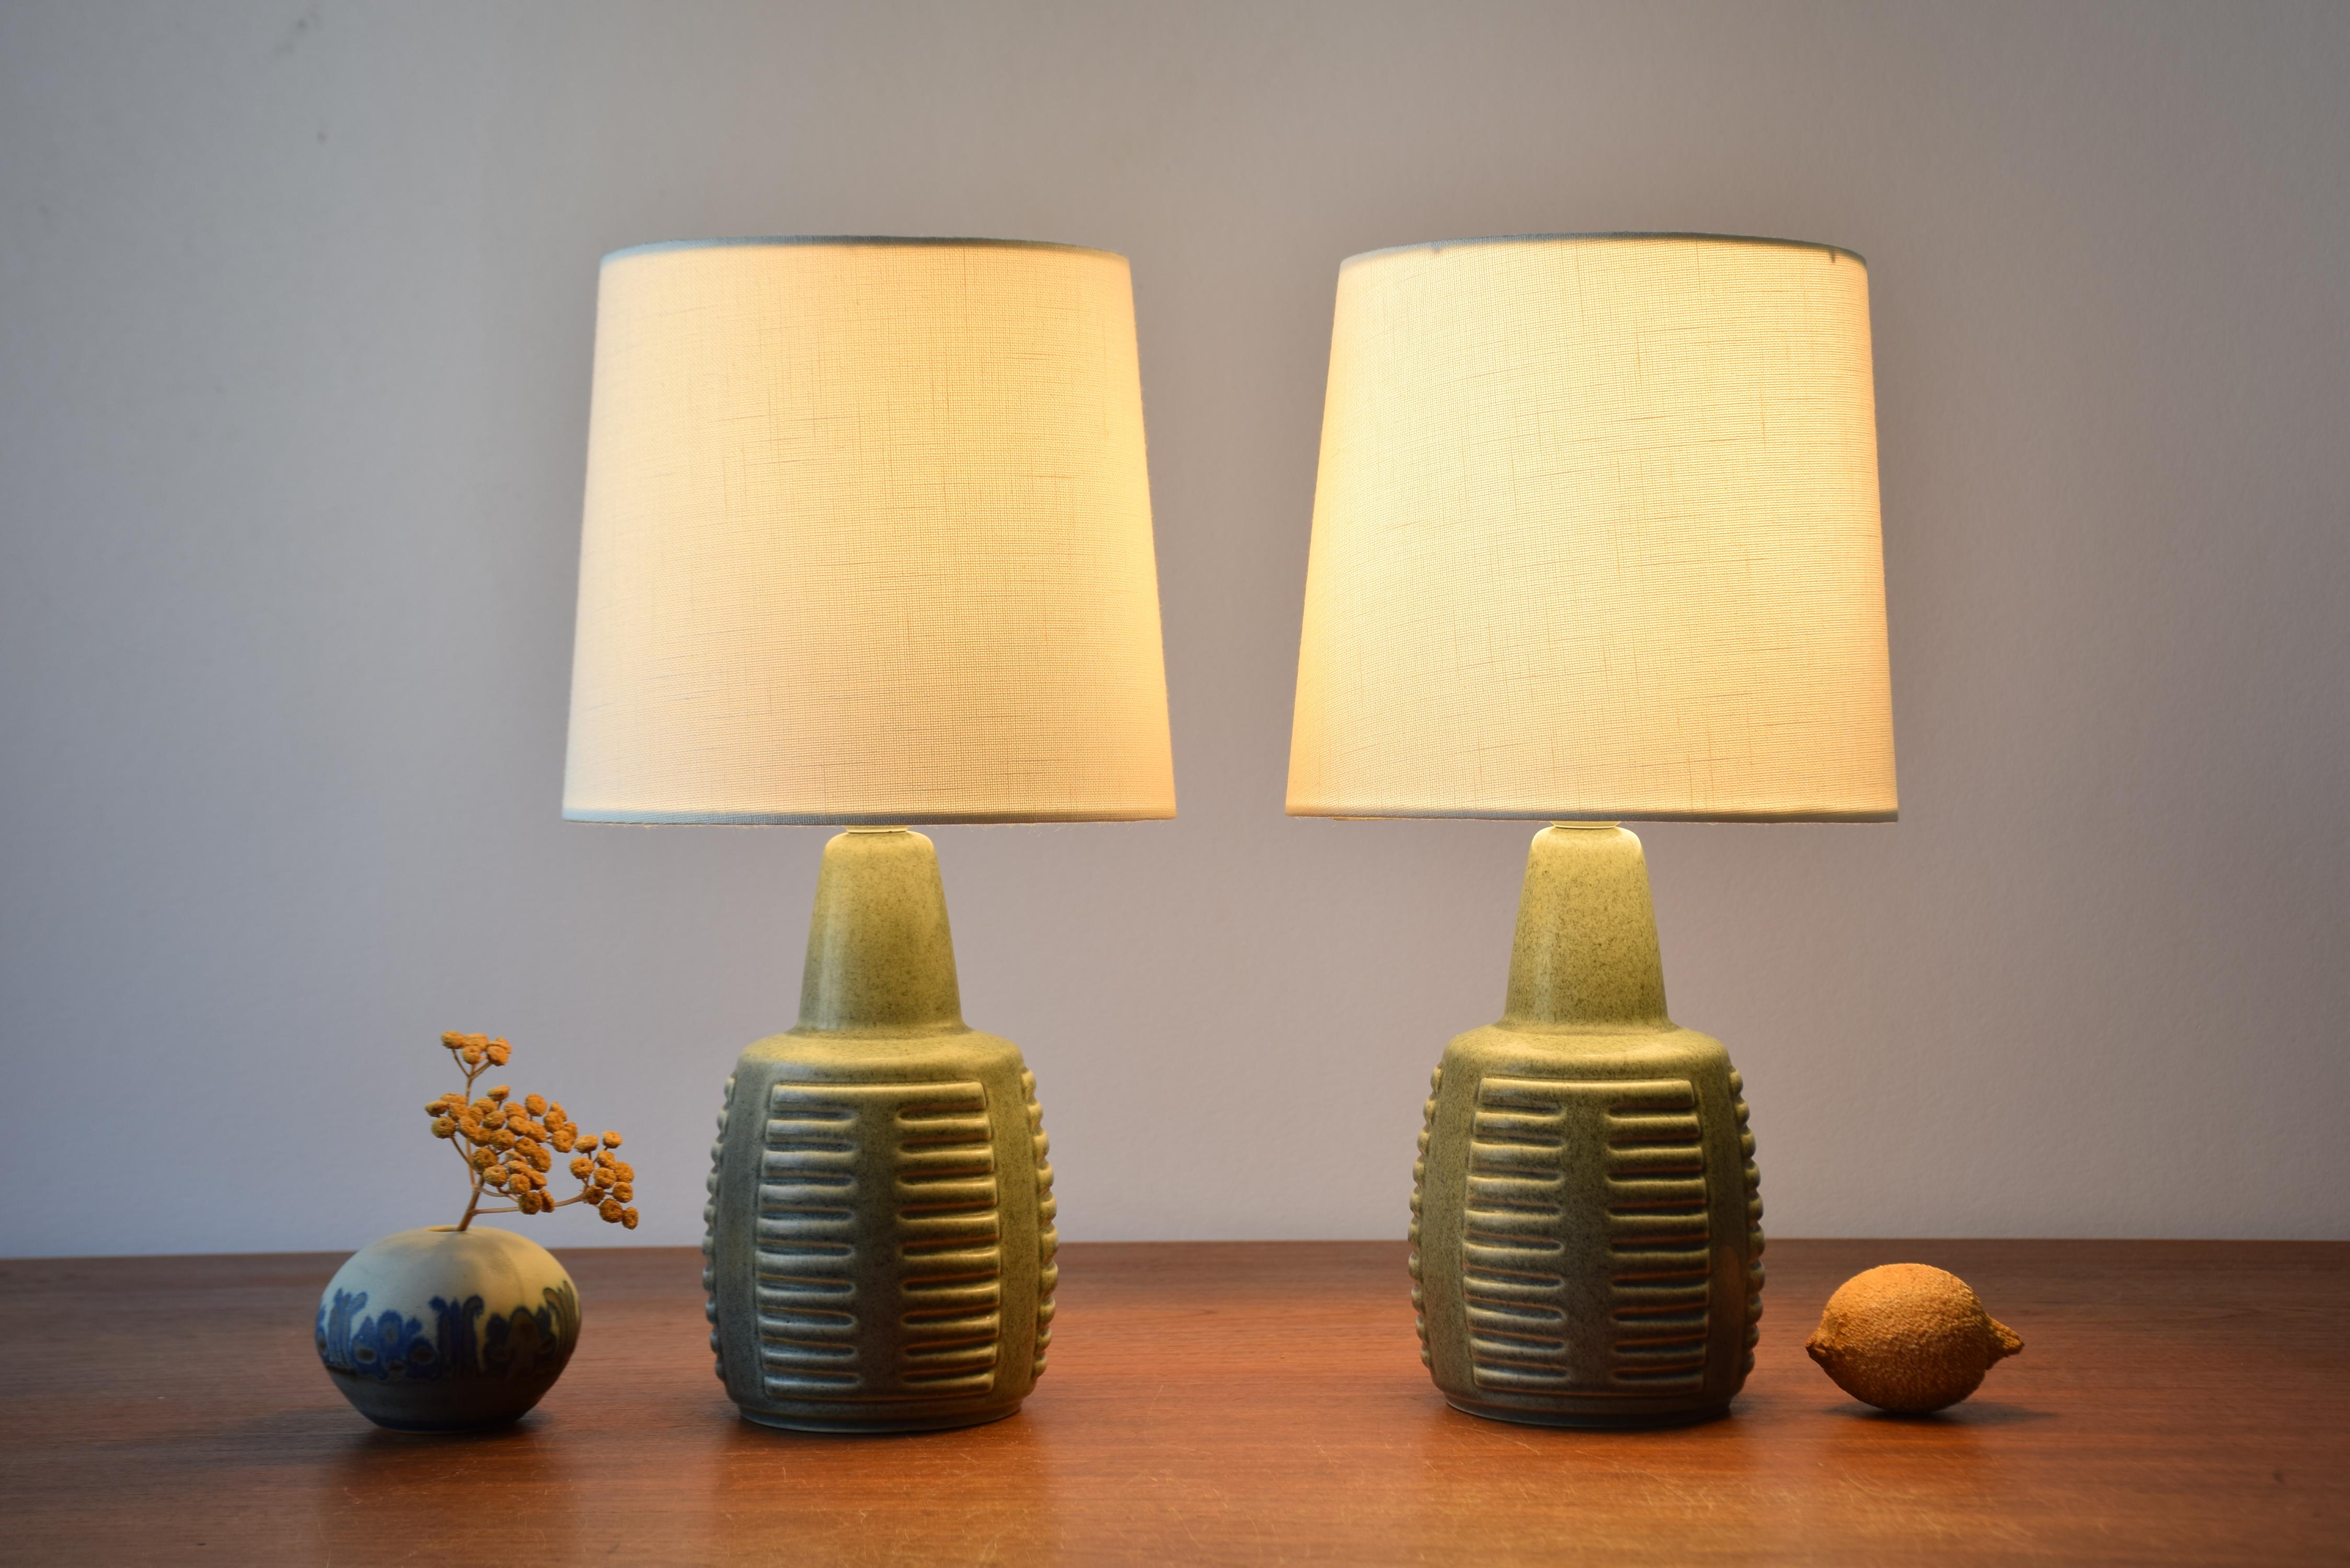 Pair of small table lamps by Einar Johansen for Søholm Stentøj, Denmark, made circa 1960s. They are perfect as bedside lamps
The lamps have dusted green speckled glaze with very little difference in color between the two lamps.

Included are new